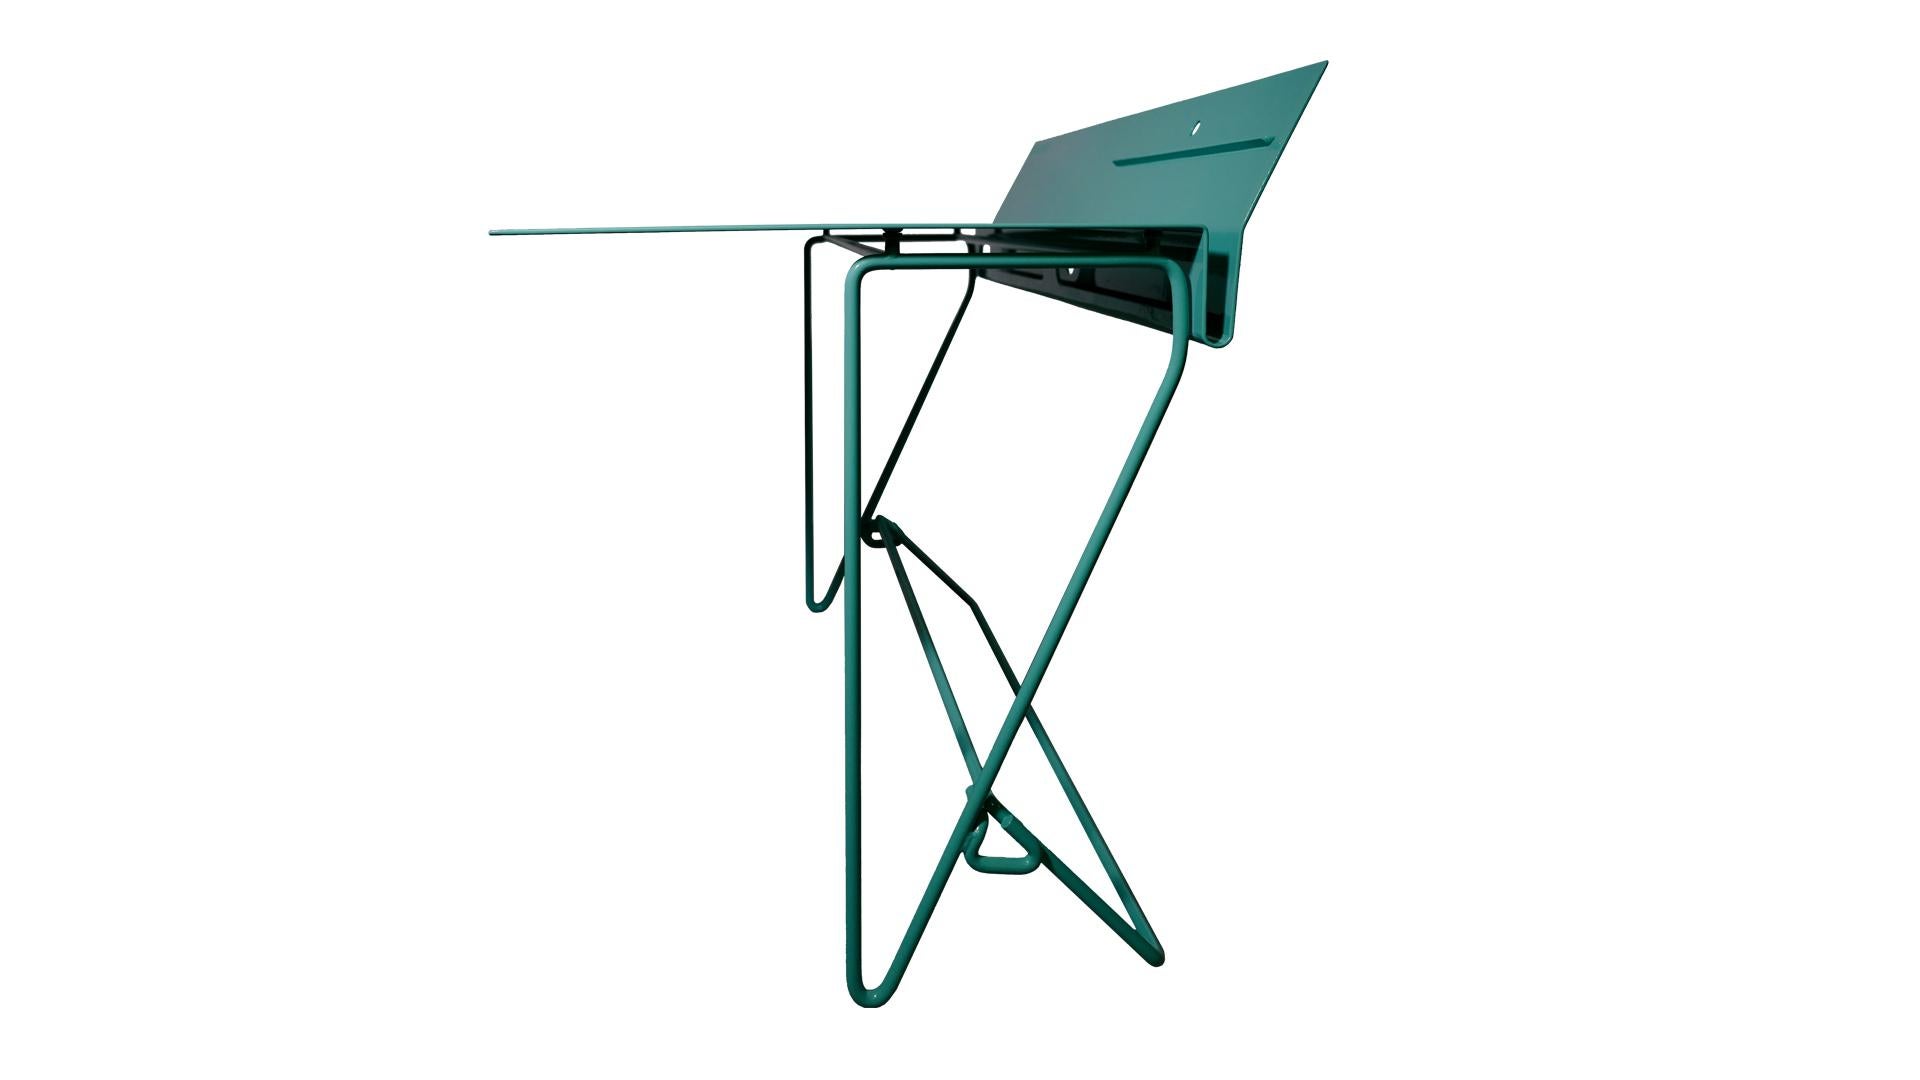 Contemporary Italian metal desk with storage elements and cable holes.
 
Monoplano is a desk which came from observing 20th century aeronautical design. its design is in a continuous pattern featuring various coordinated details: the grommet pockets